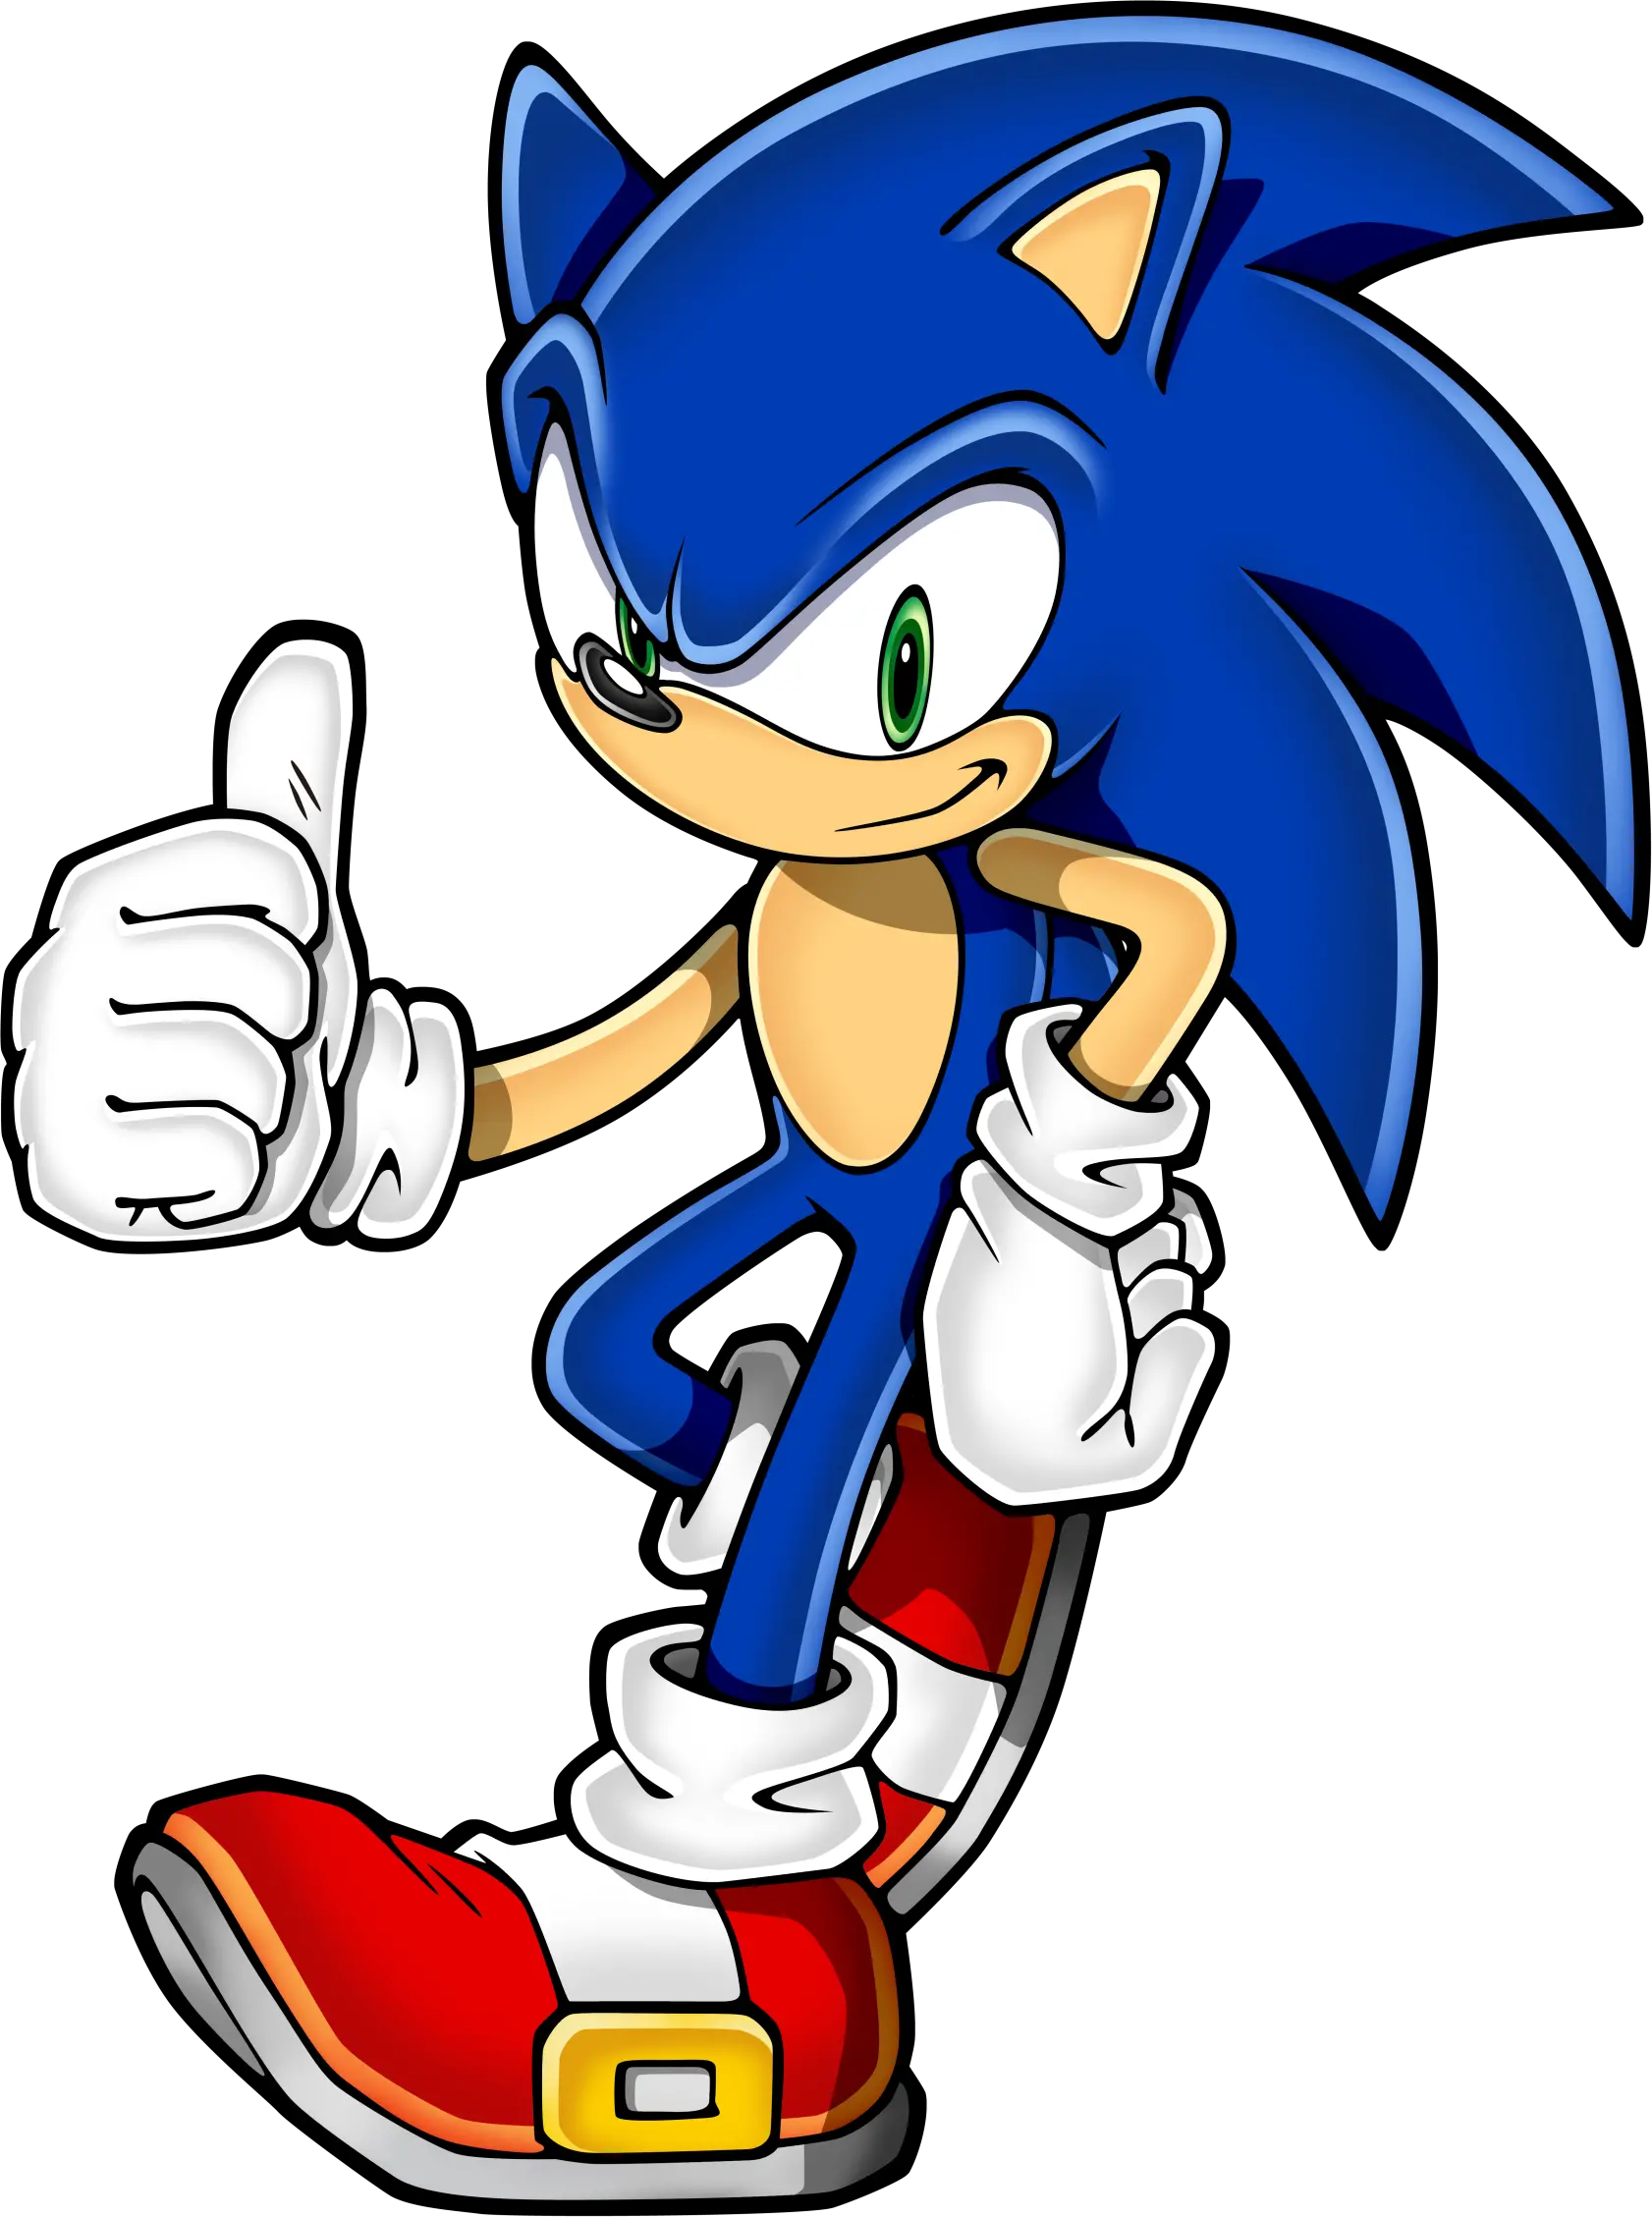 Sonic Png And Vectors For Free Download Dlpngcom Sonic The Hedgehog Cartoon Sanic Png